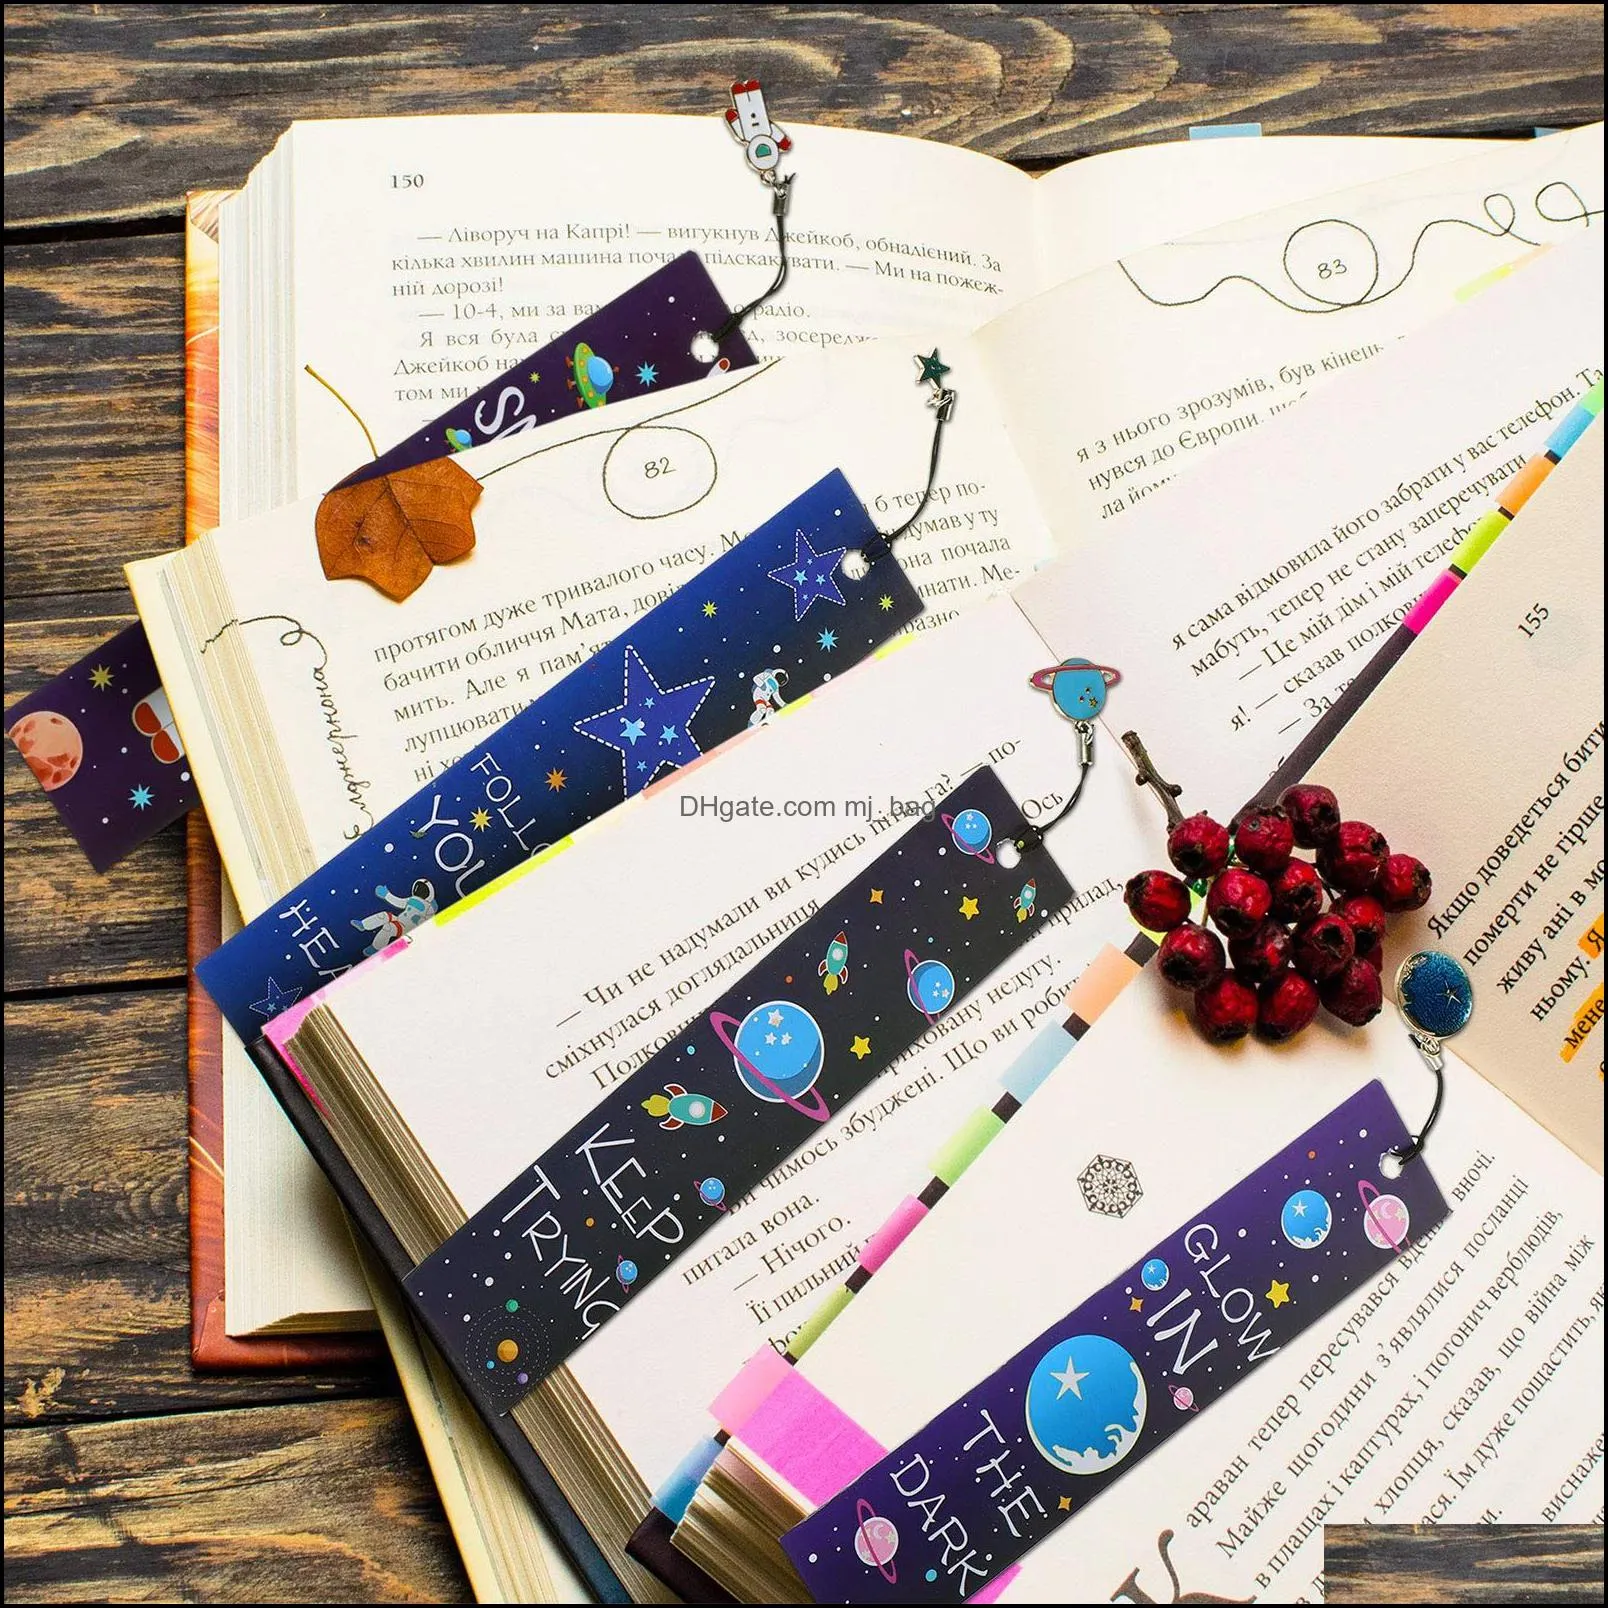 bookmark l space theme bookmarks set inspirational quotes with metal charms encouraging school prize for students kids adts yummyshop